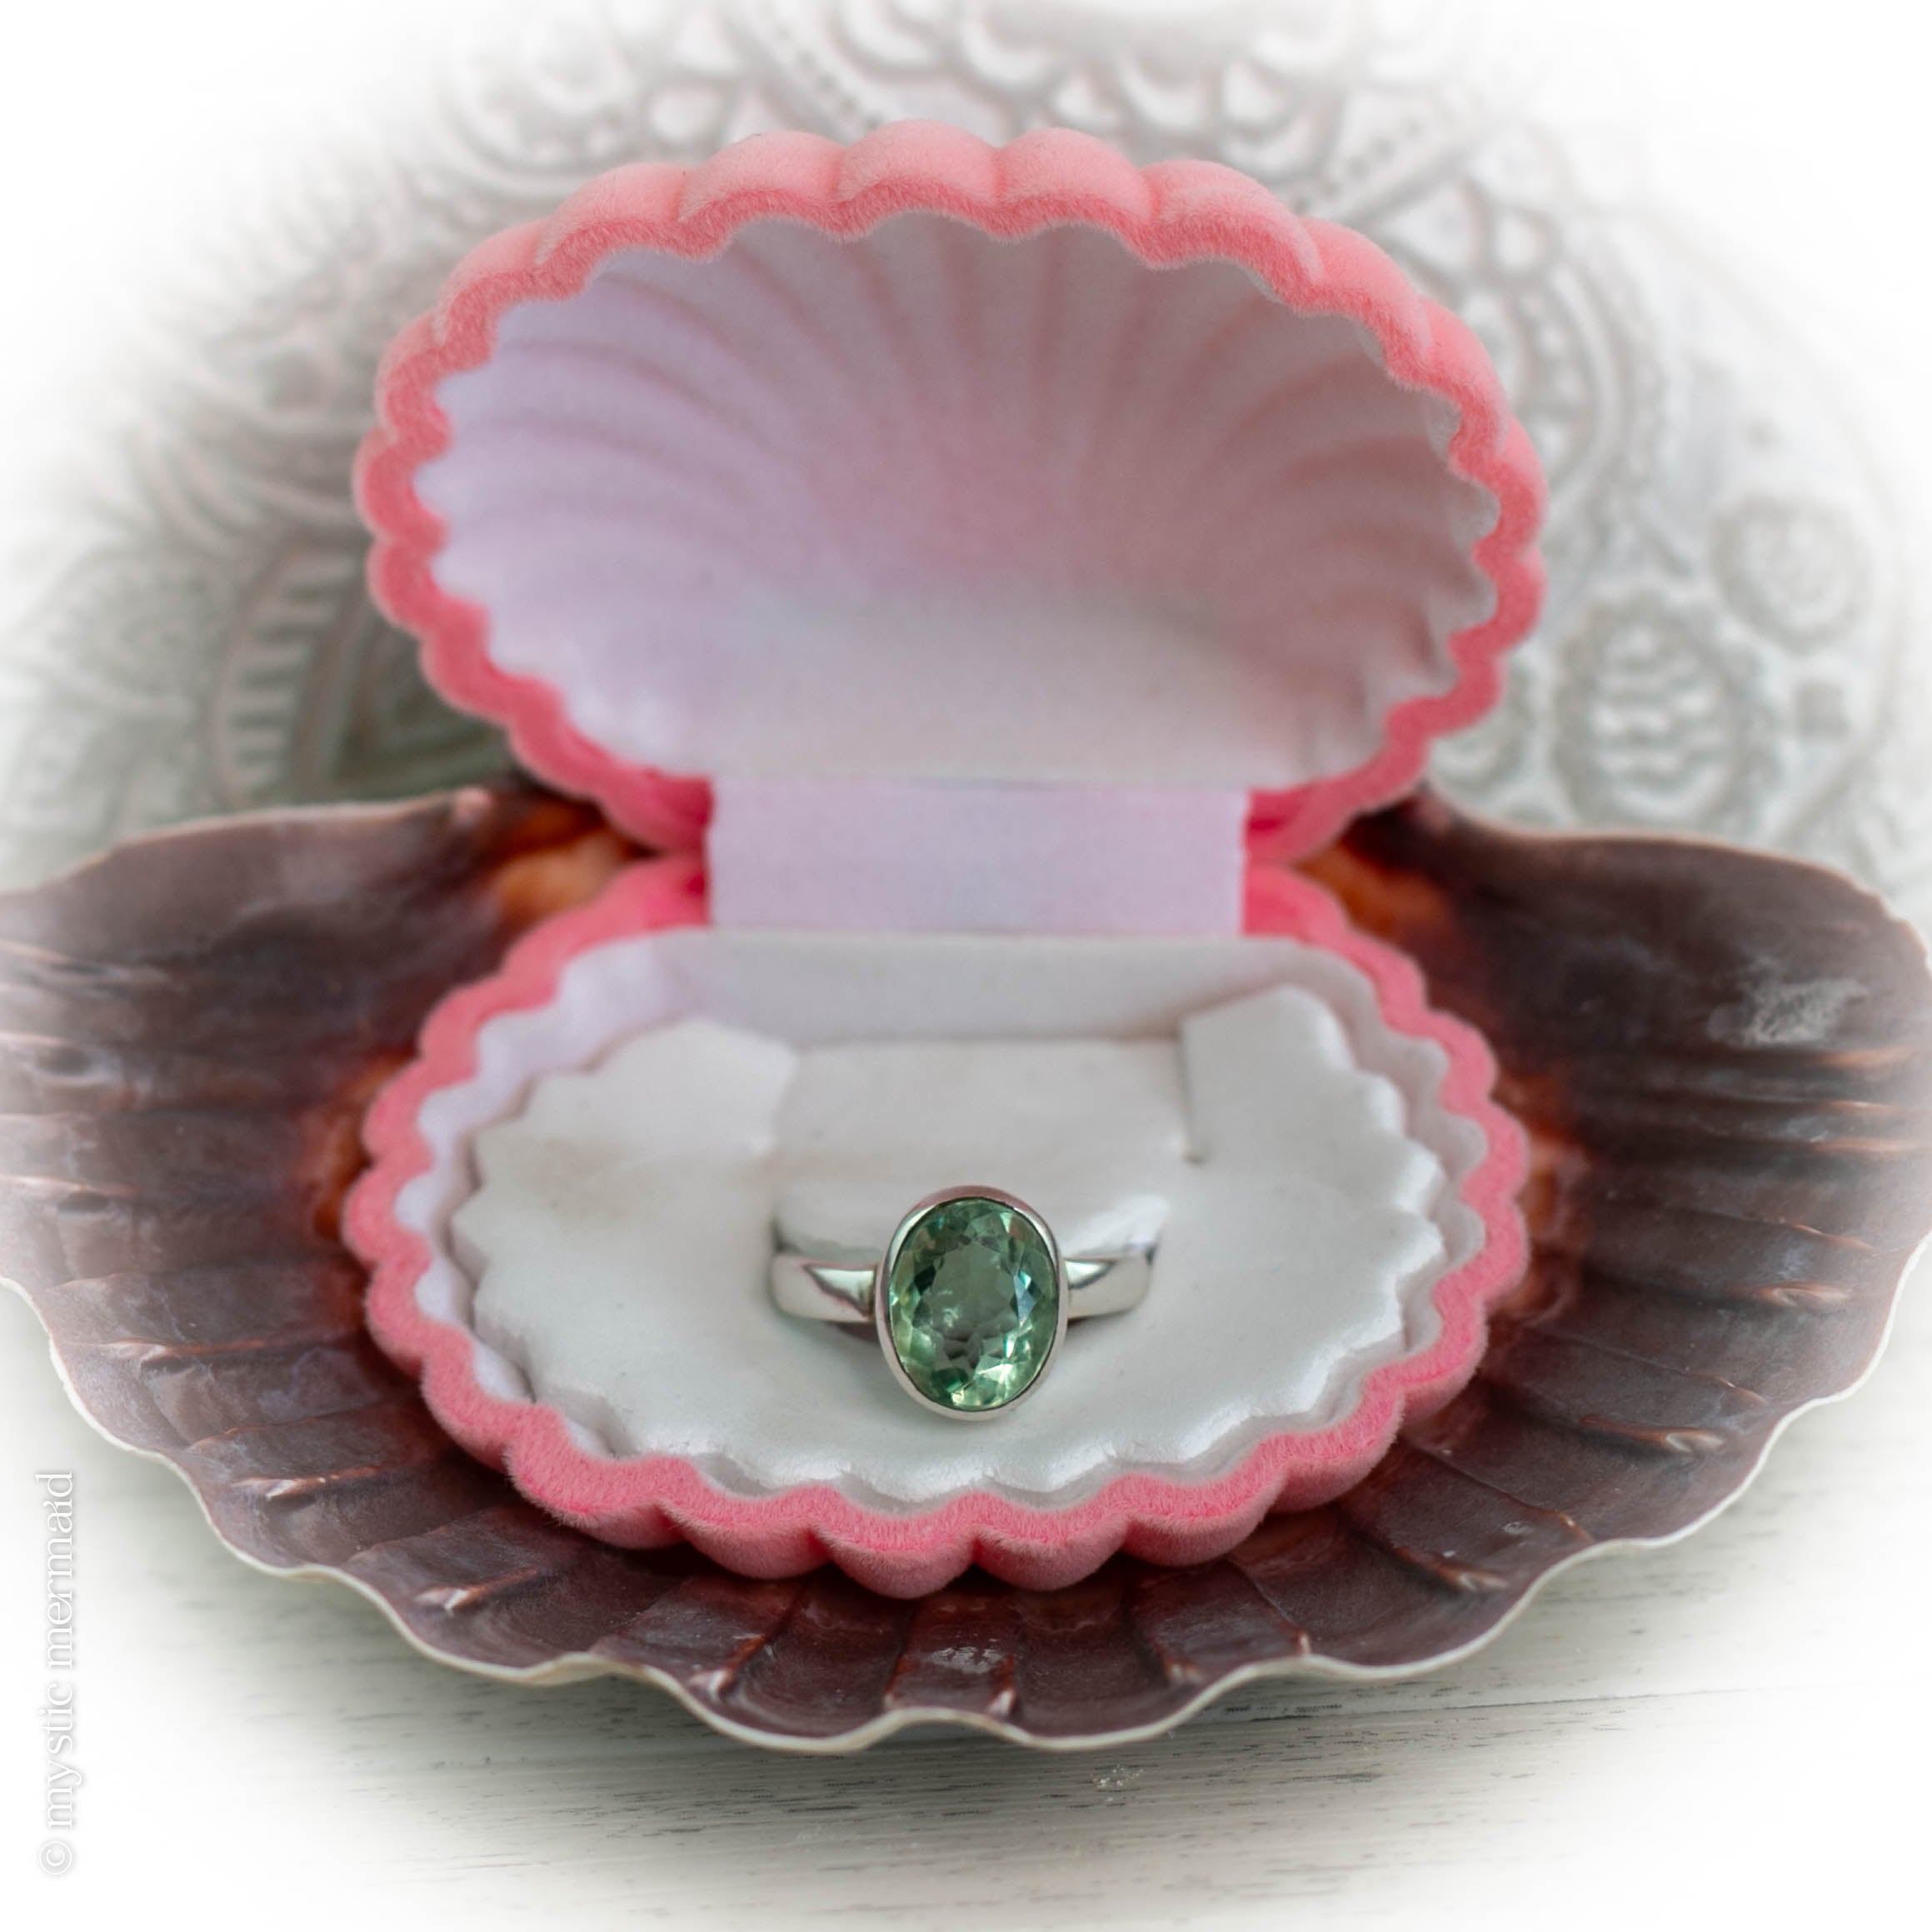 Magnificent Green Fluorite 925 Sterling Silver Ring (Size 5.5)